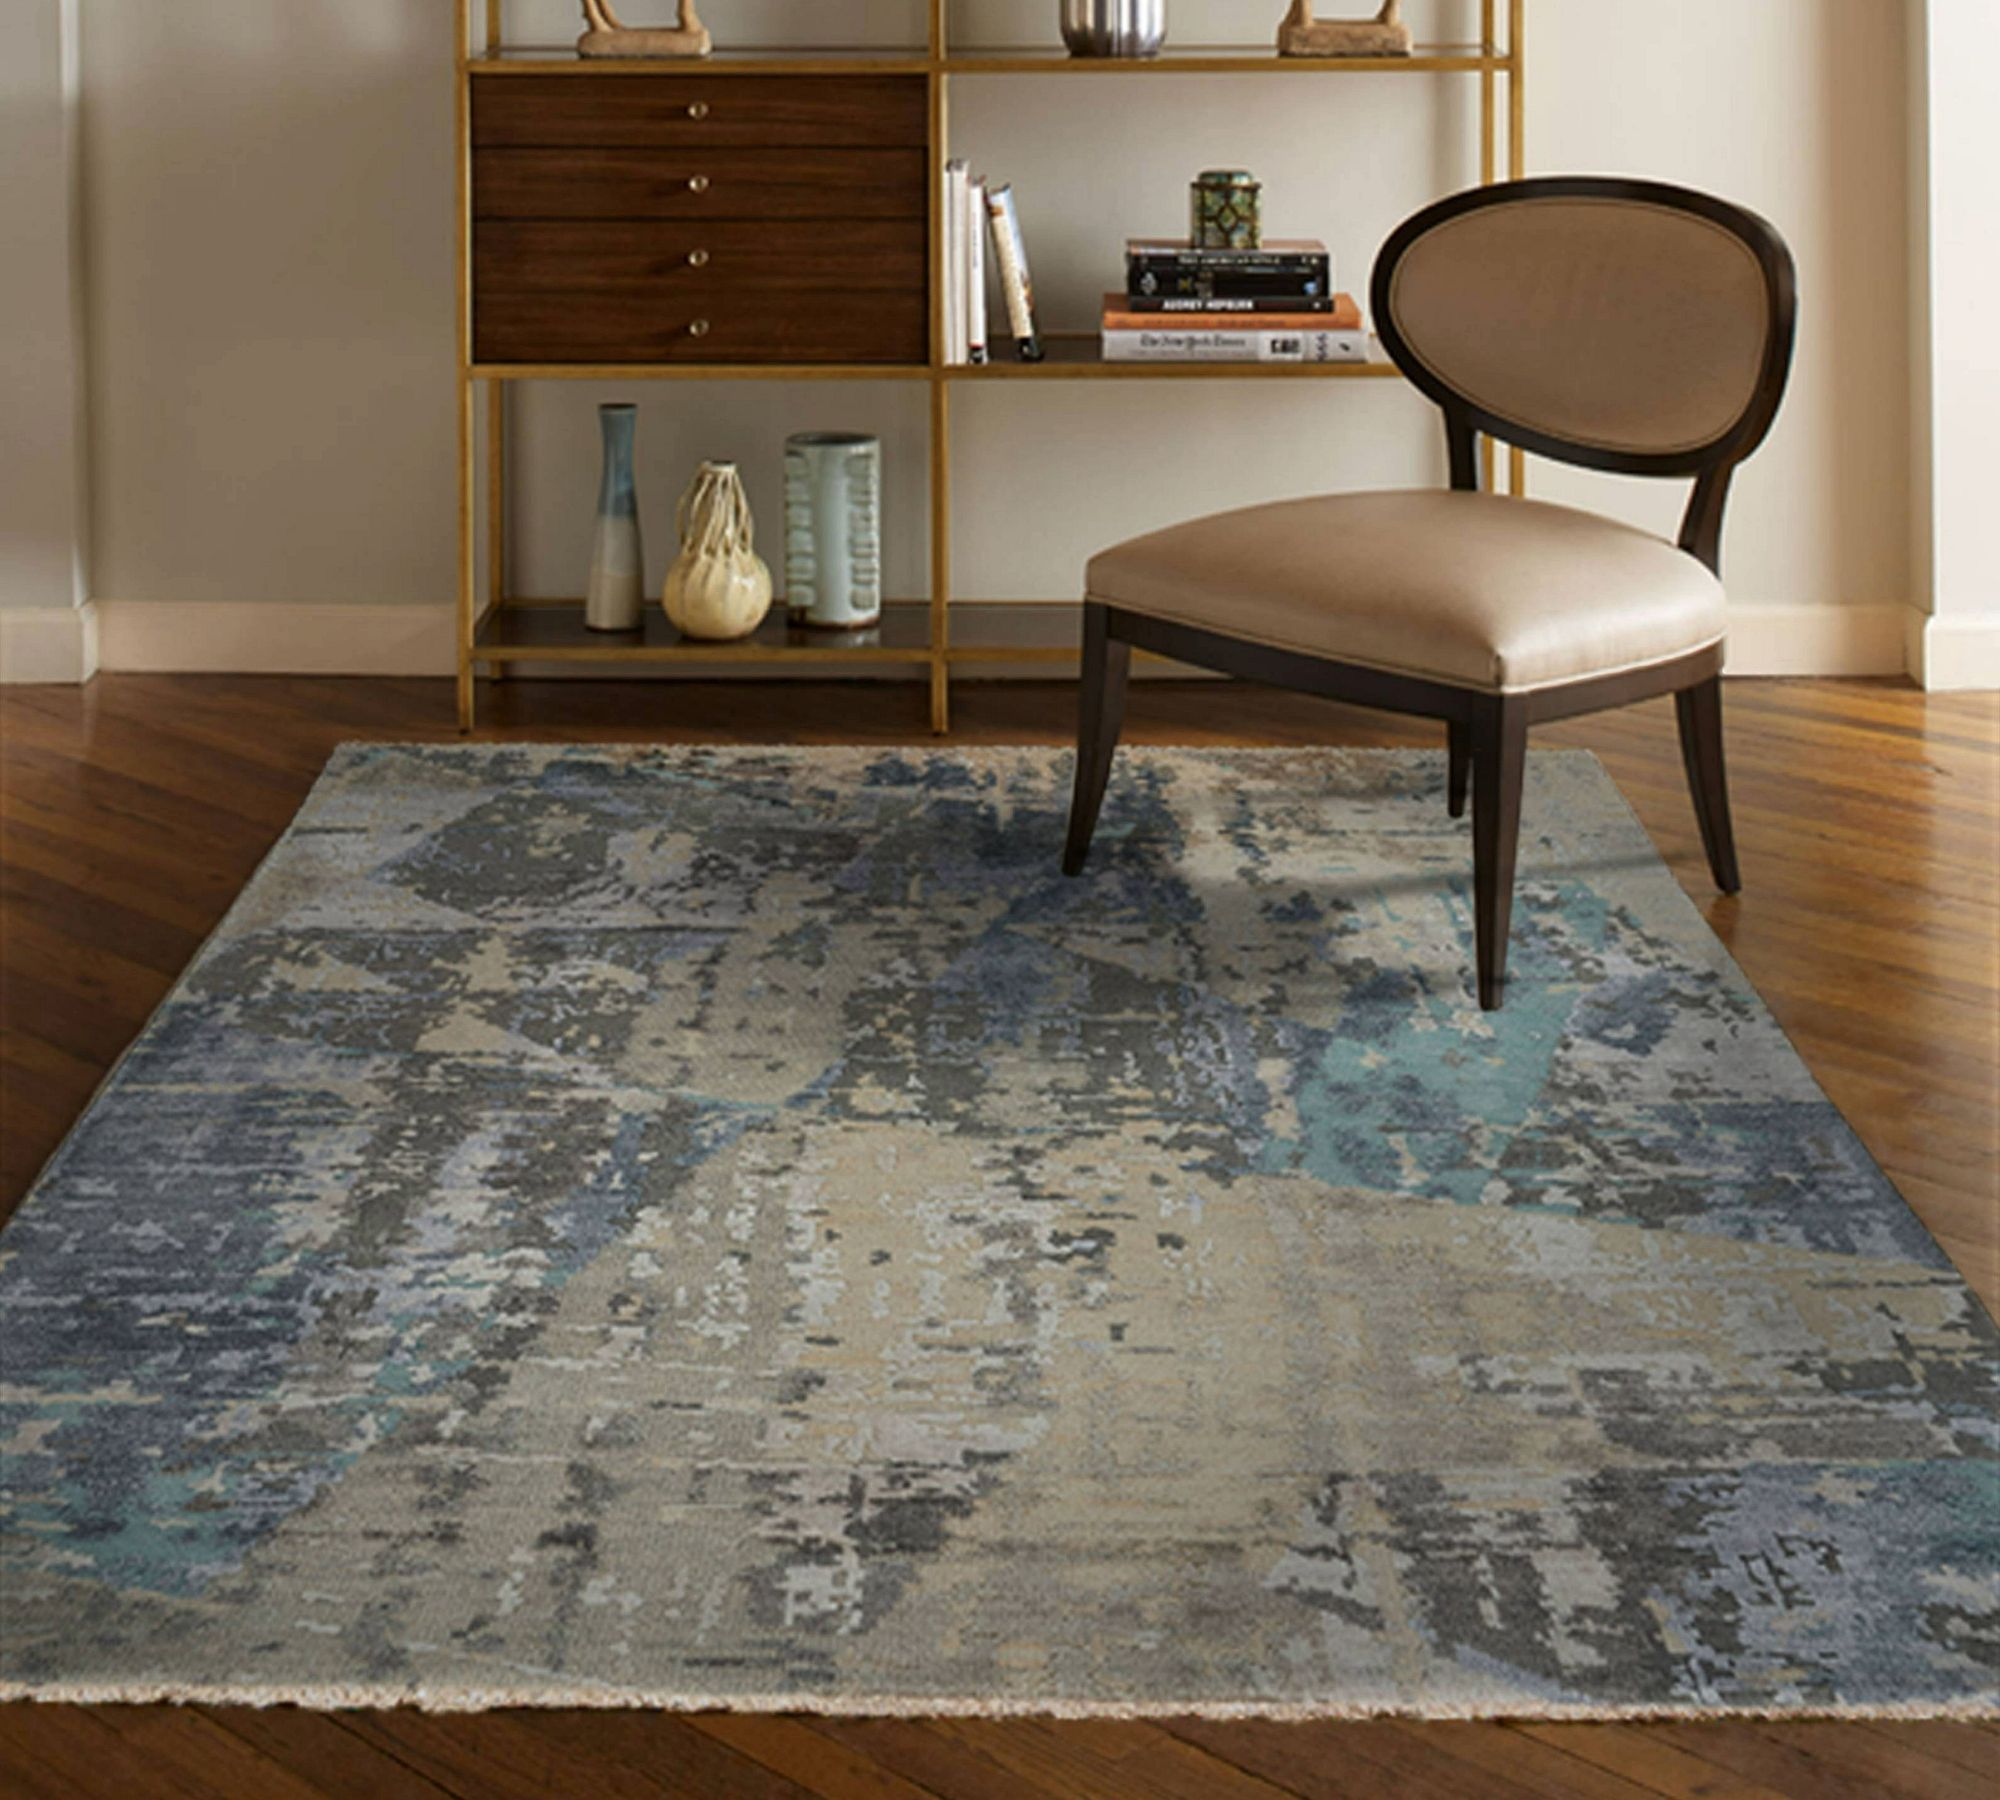 Ellsa Hand-Knotted Wool Persian-Style Rug